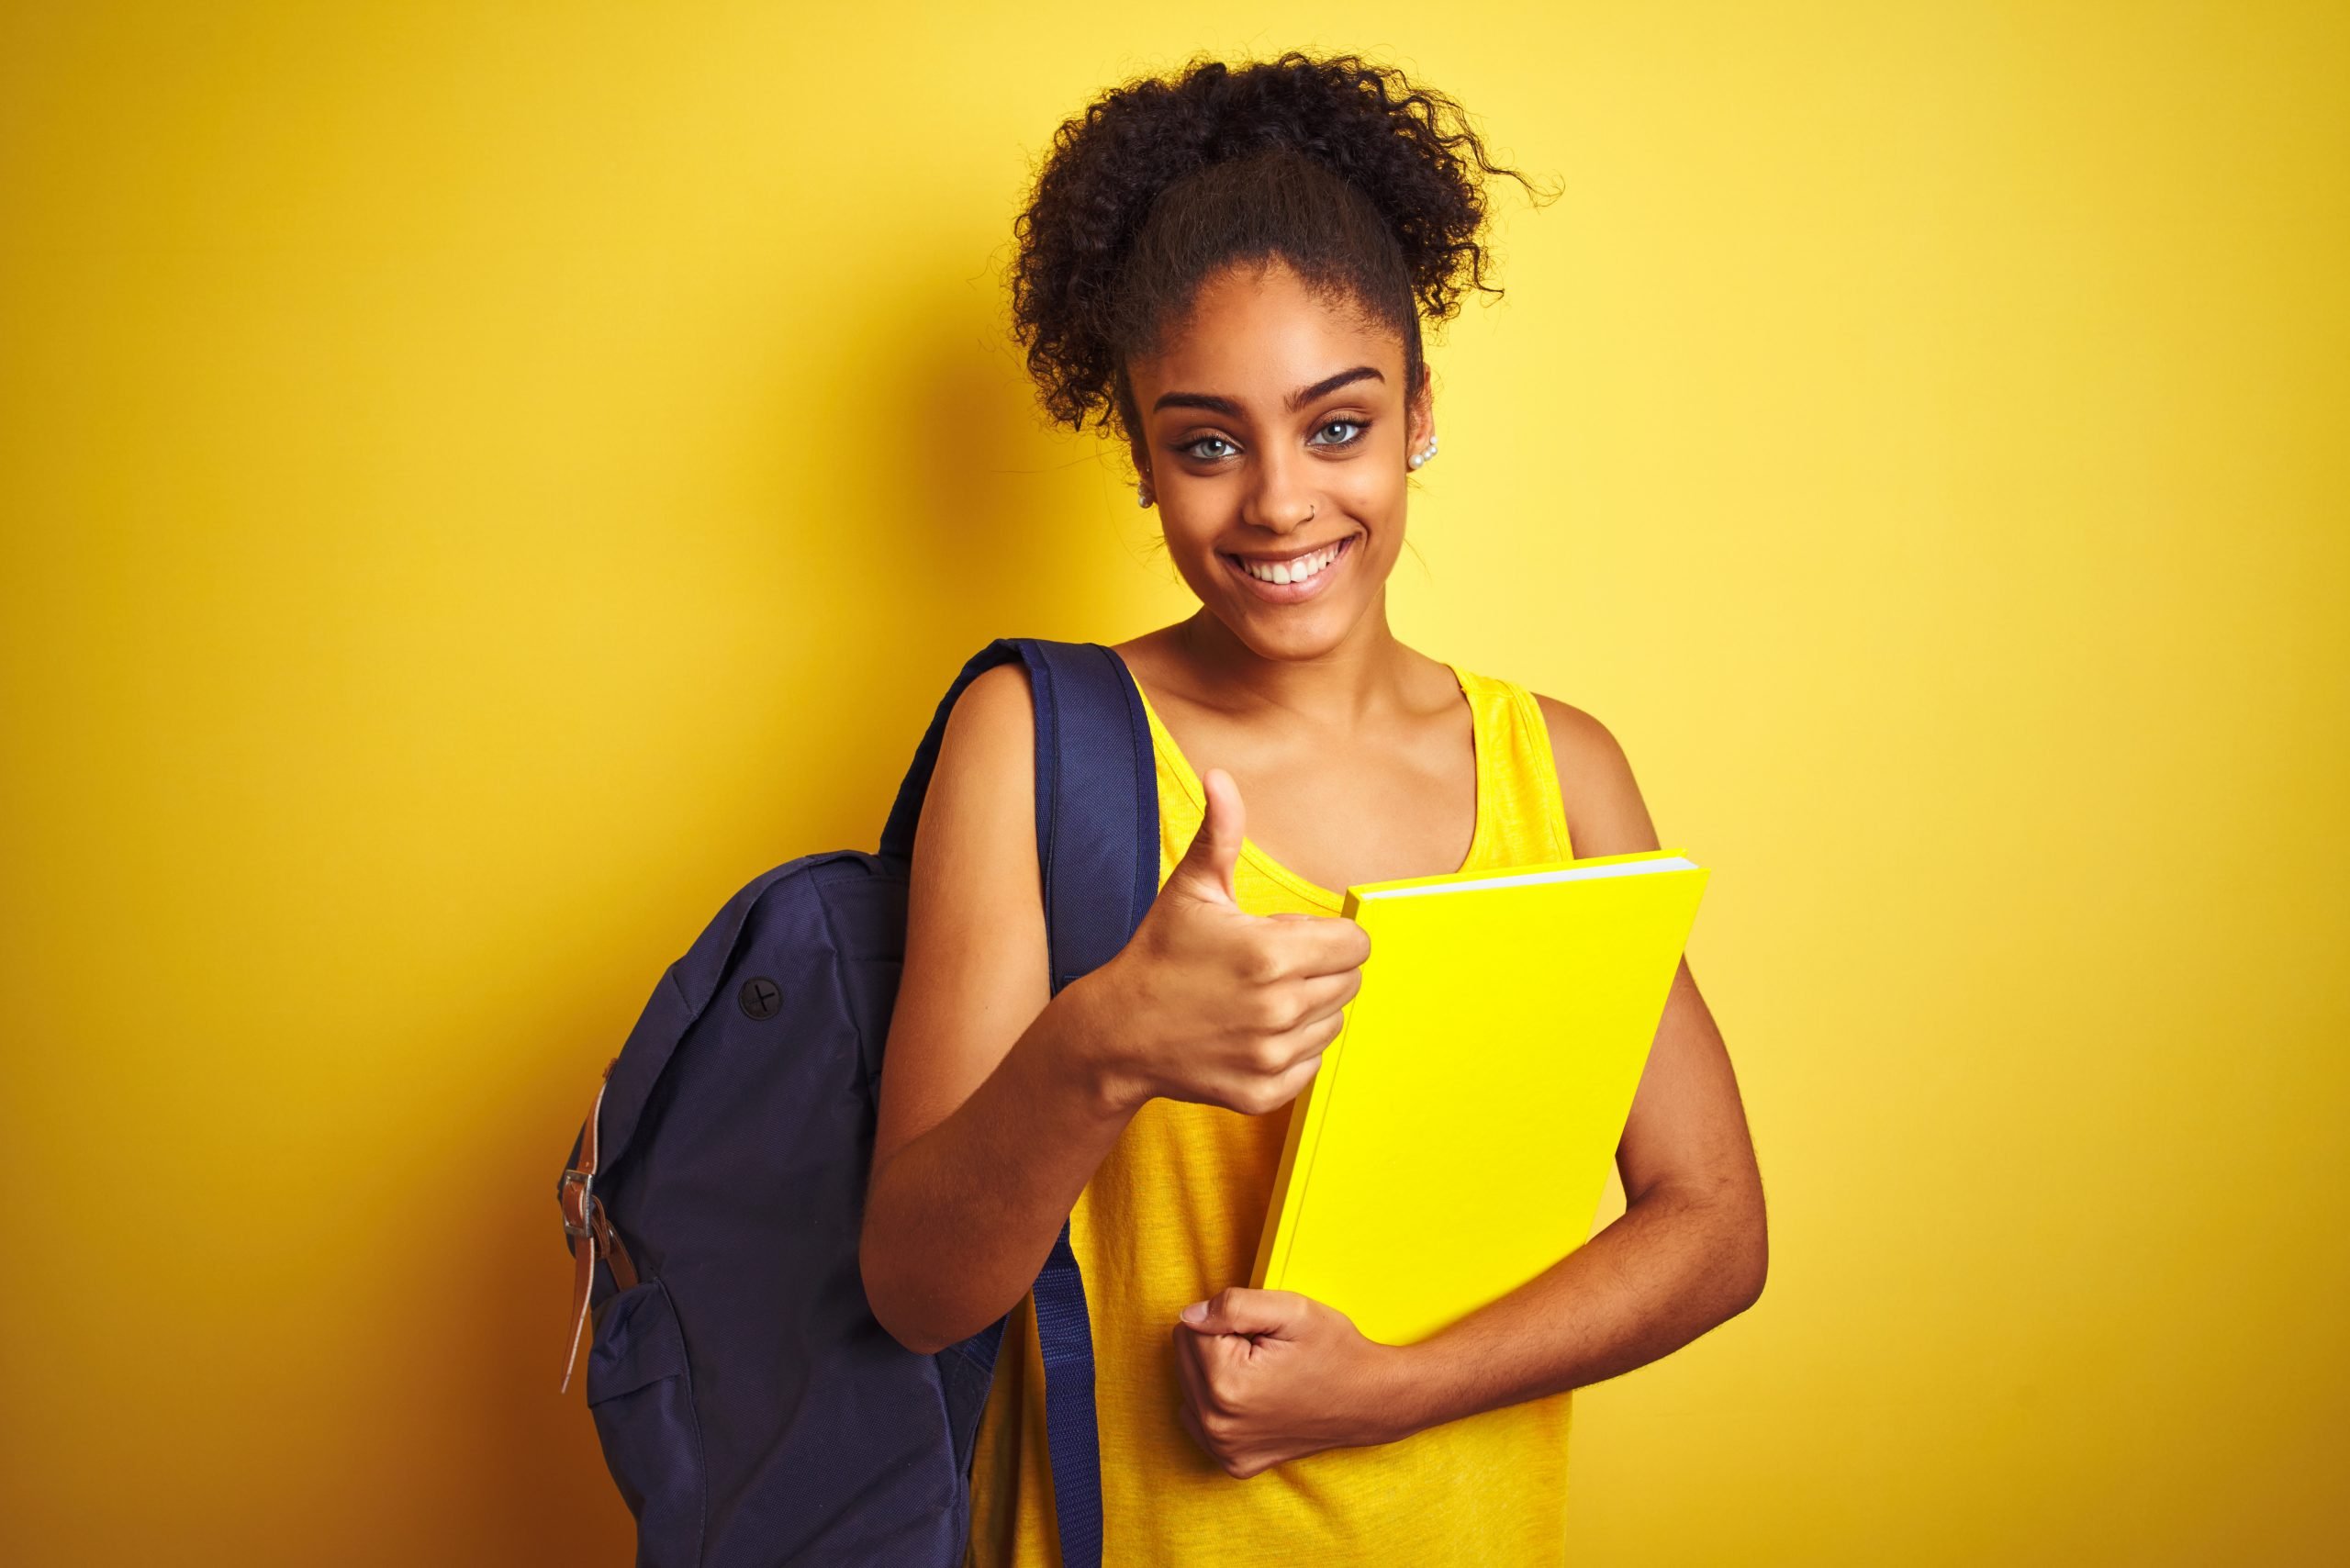 A cheerful young woman with curly hair giving a thumbs-up while holding a bright yellow notebook, wearing a yellow tank top and a blue backpack, standing against a vivid yellow background, attesting to the success gained with Canberra Tutoring.